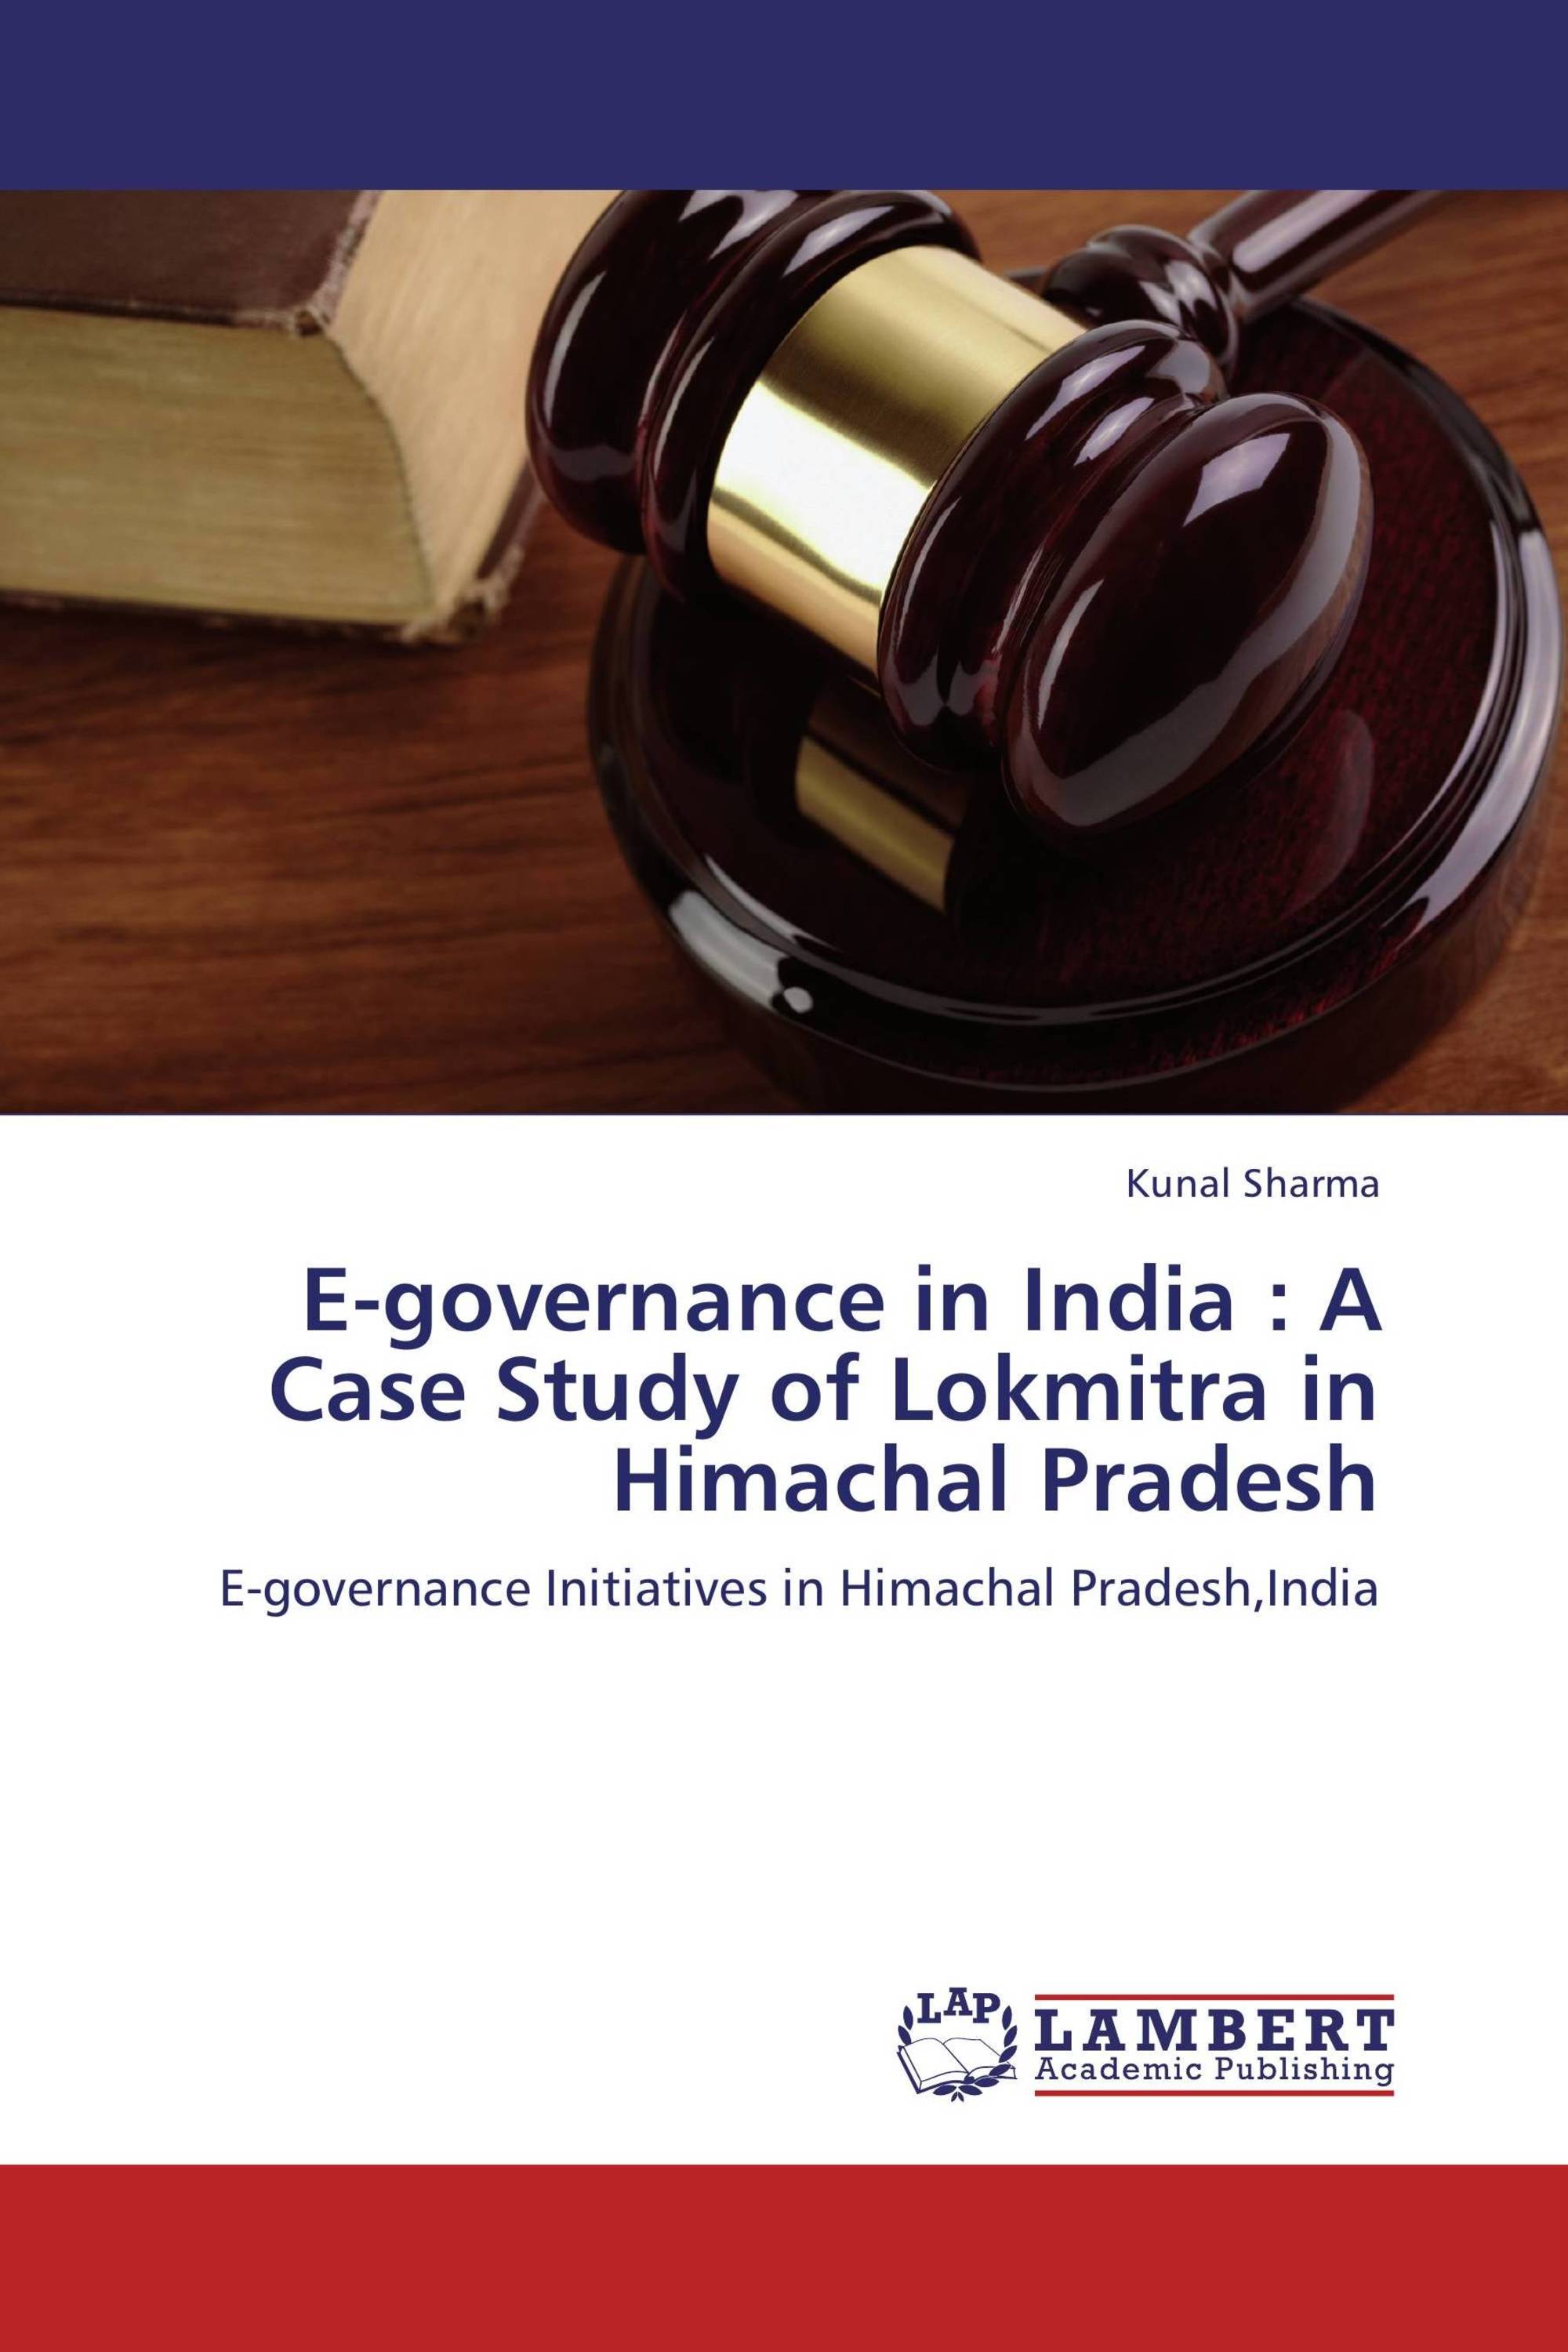 corporate governance case study with solution in india